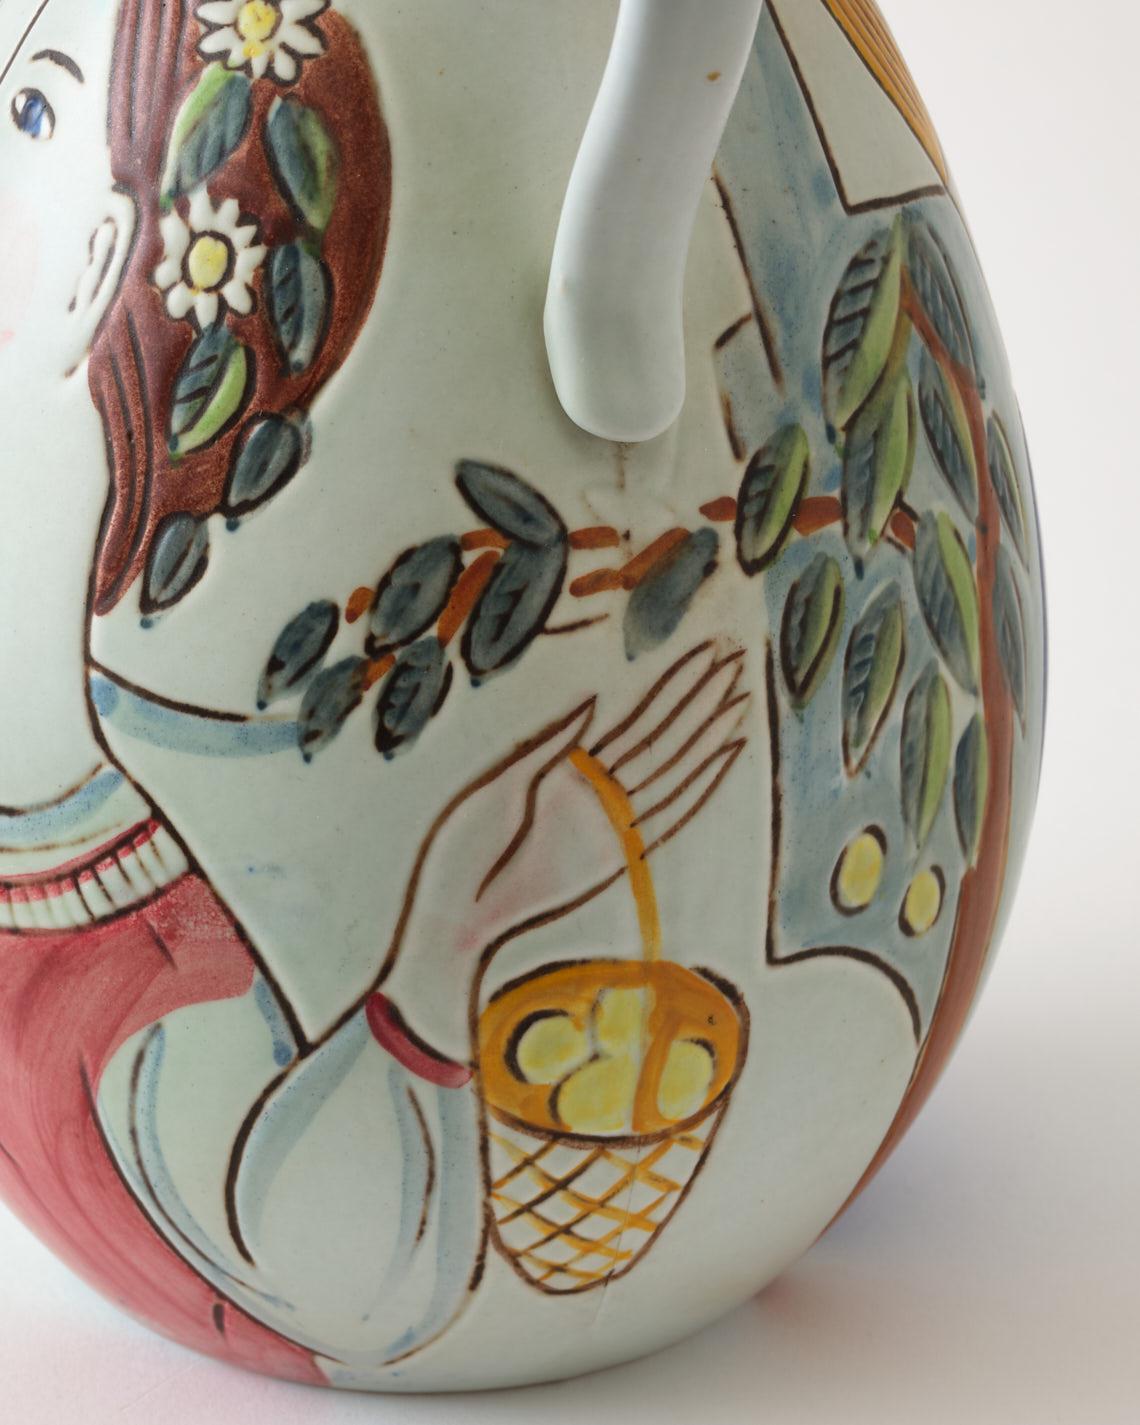 Mid-20th Century Ceramic Vase by C-H Stalhane, Sweden, Woman & Man Painted, Multi Colors, C 1950 For Sale